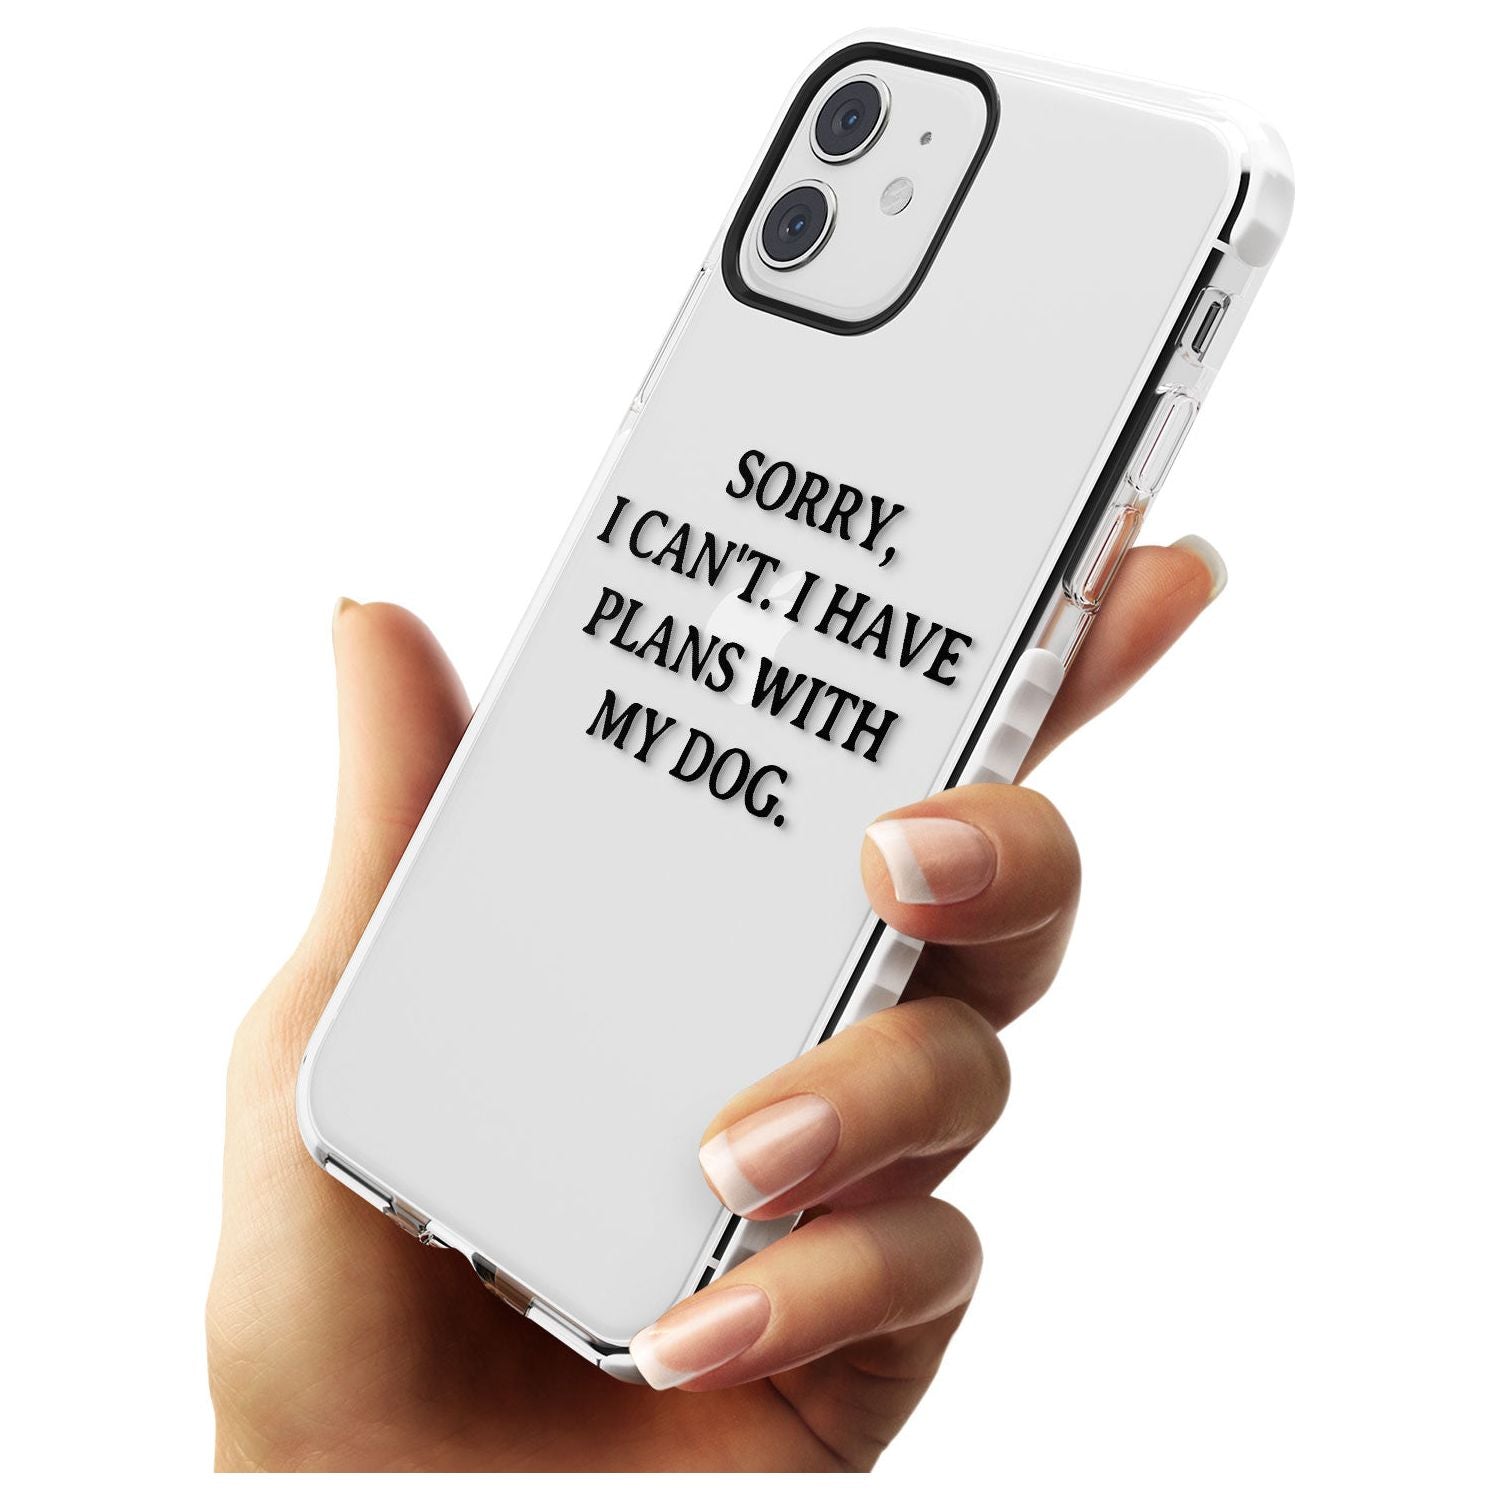 Plans with Dog Impact Phone Case for iPhone 11